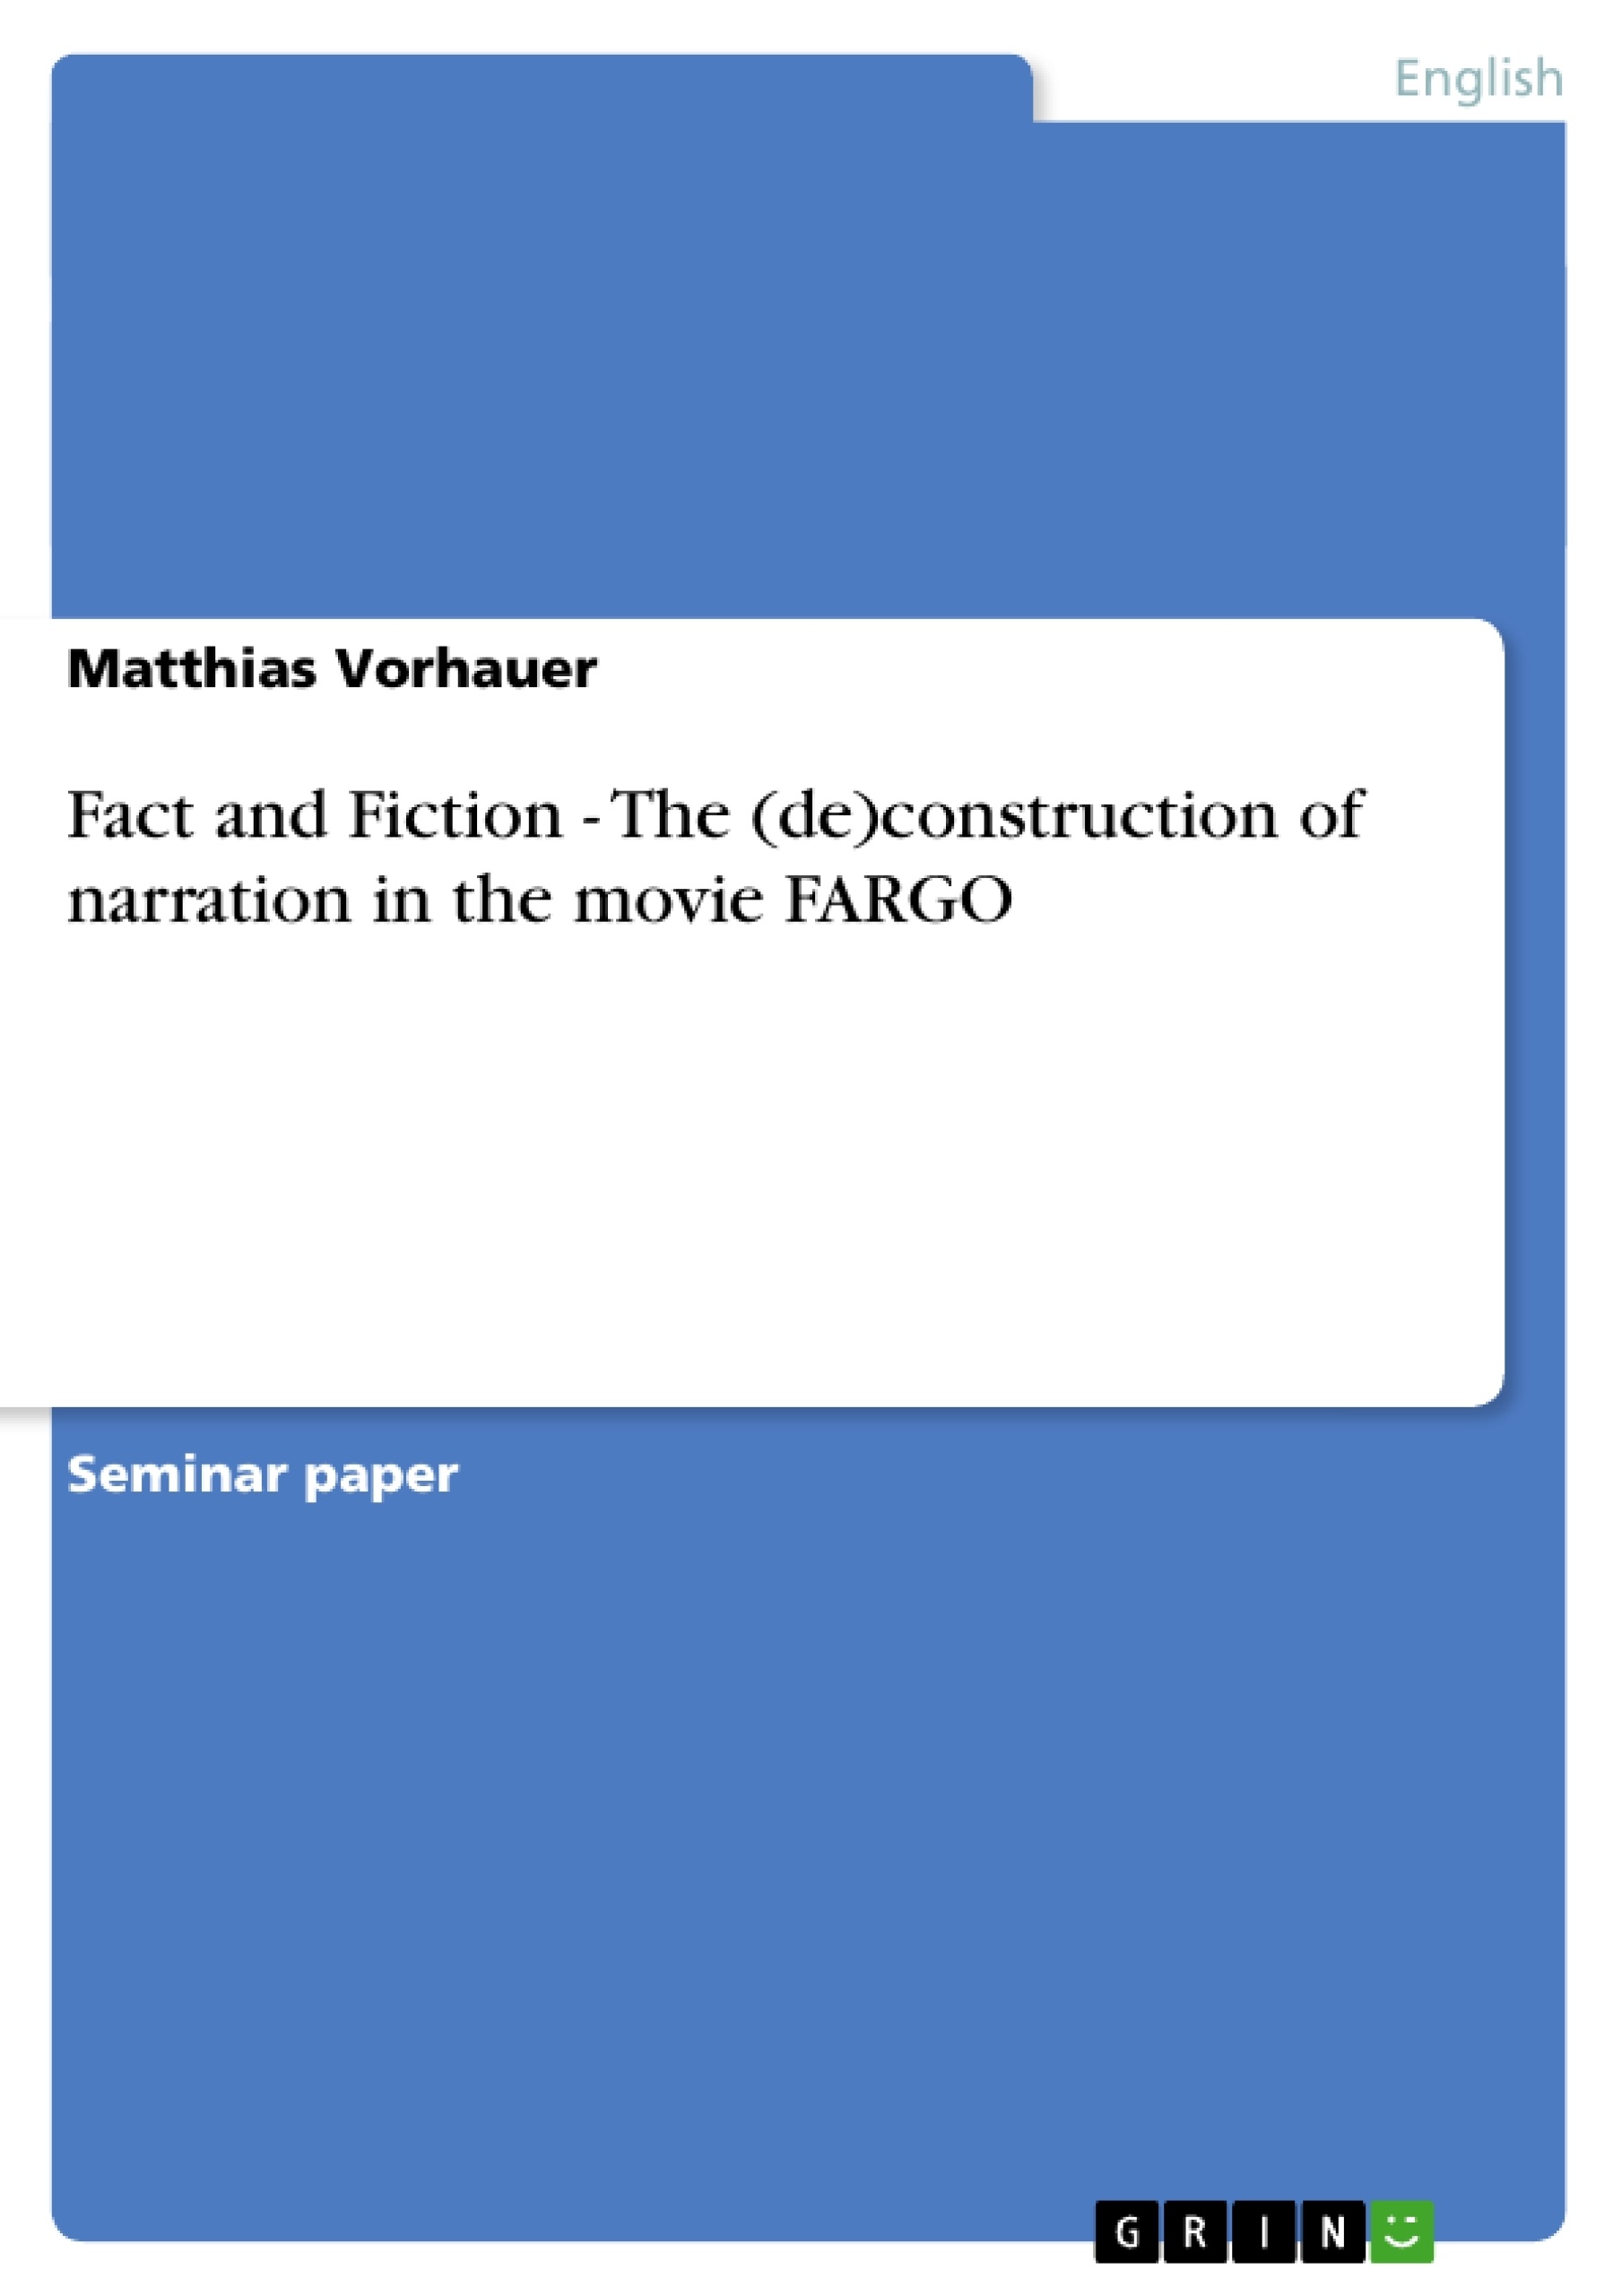 Título: Fact and Fiction - The (de)construction of narration in the movie FARGO